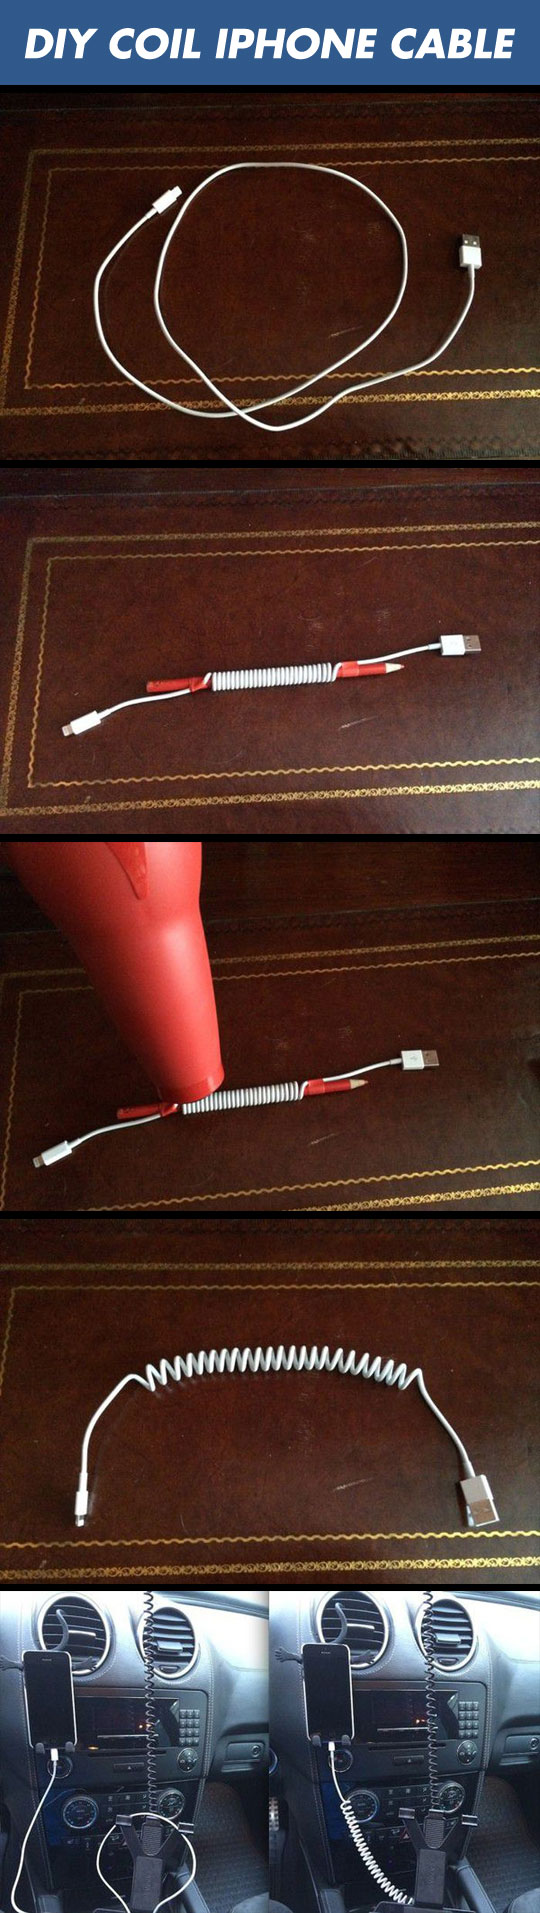 diy-coil-charging-cable